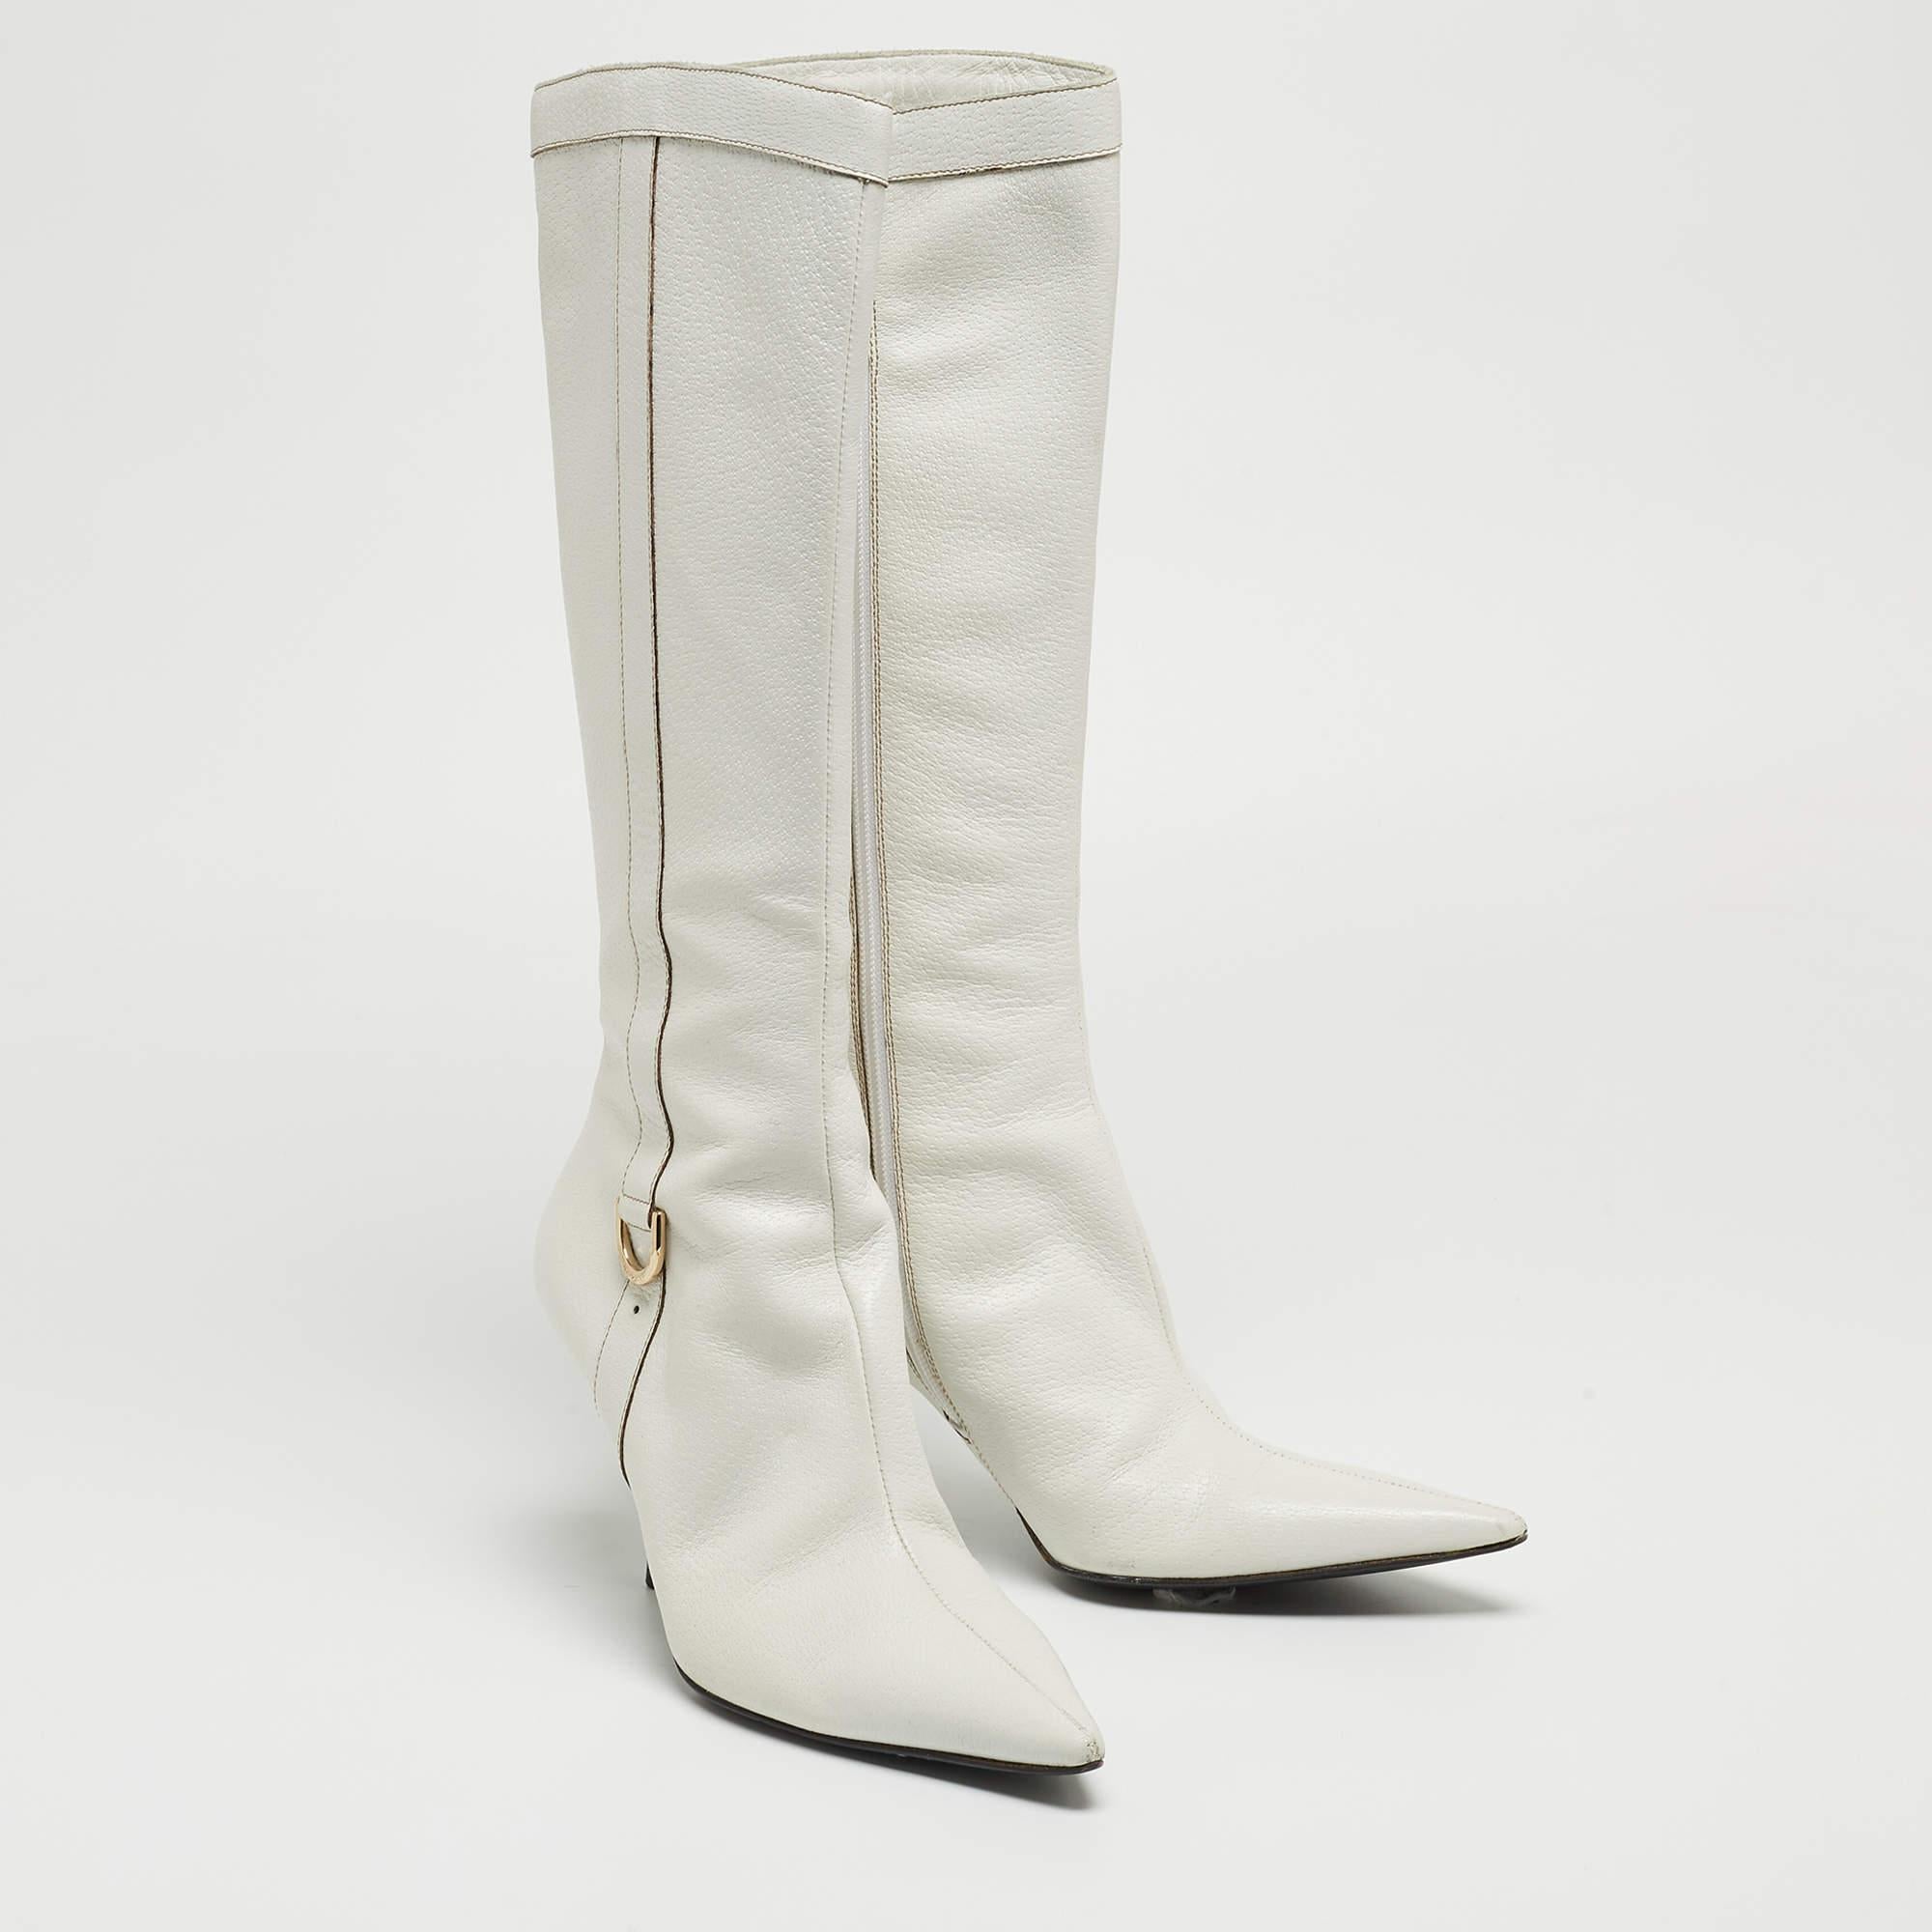 Women's Gucci White Leather Pointed Toe Knee Length Boots Size 41